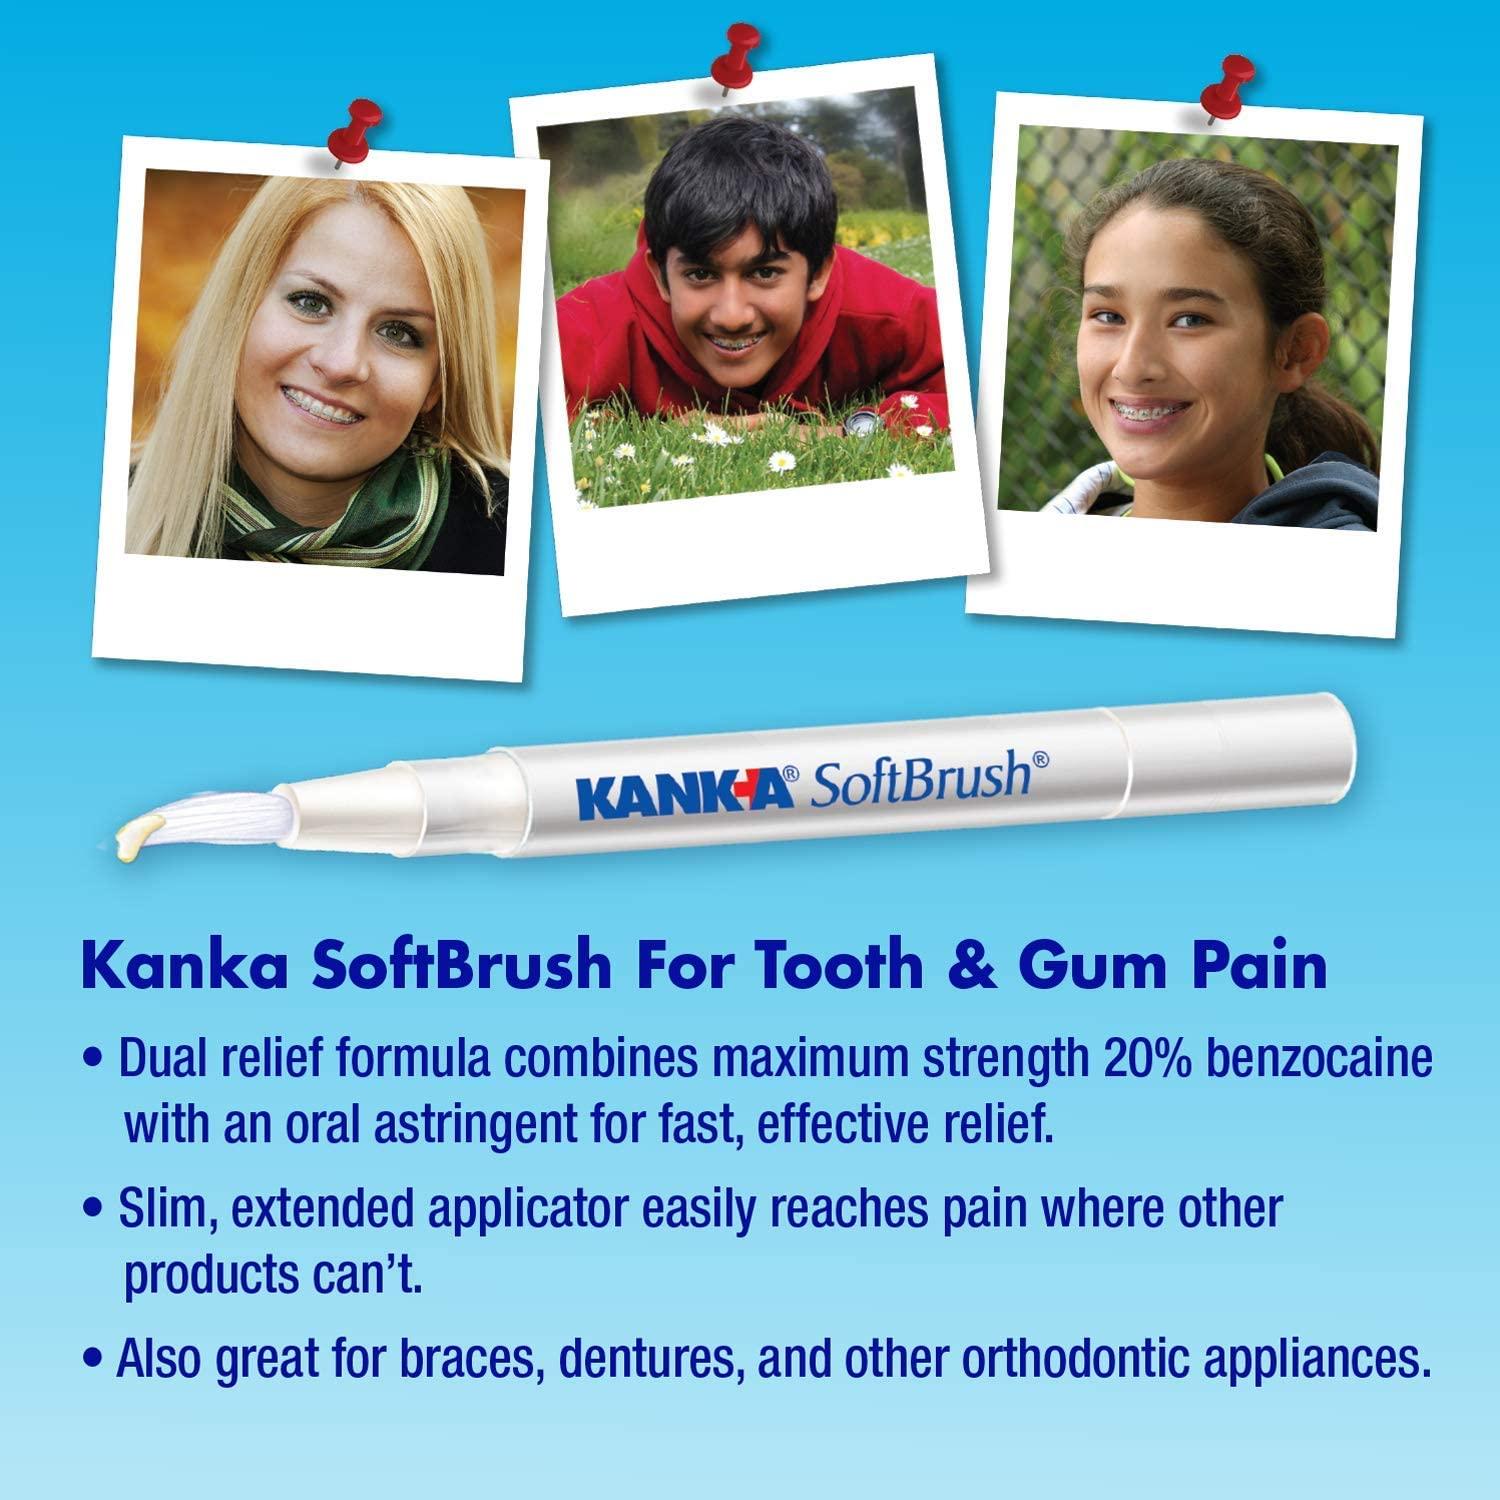 Kank-A Soft Brush ToothMouth Pain Gel, Professional India